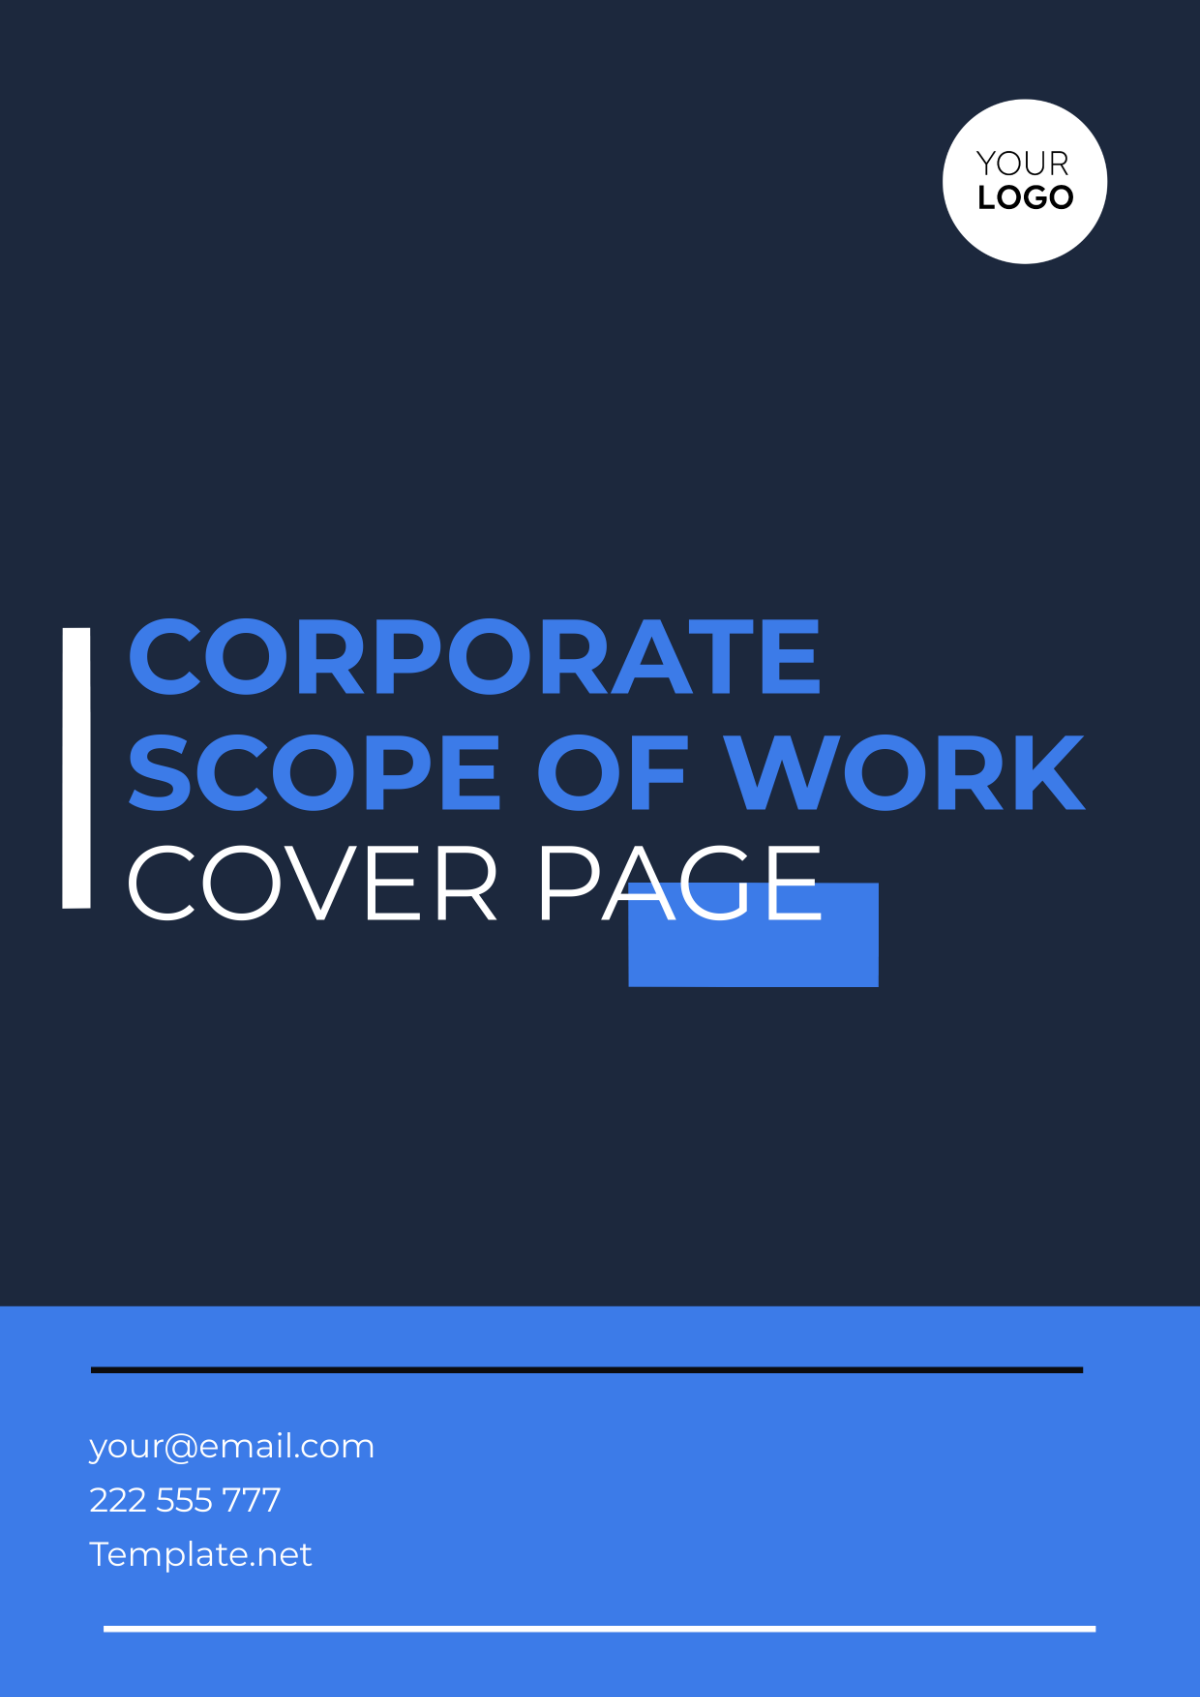 Corporate Scope of Work Cover Page